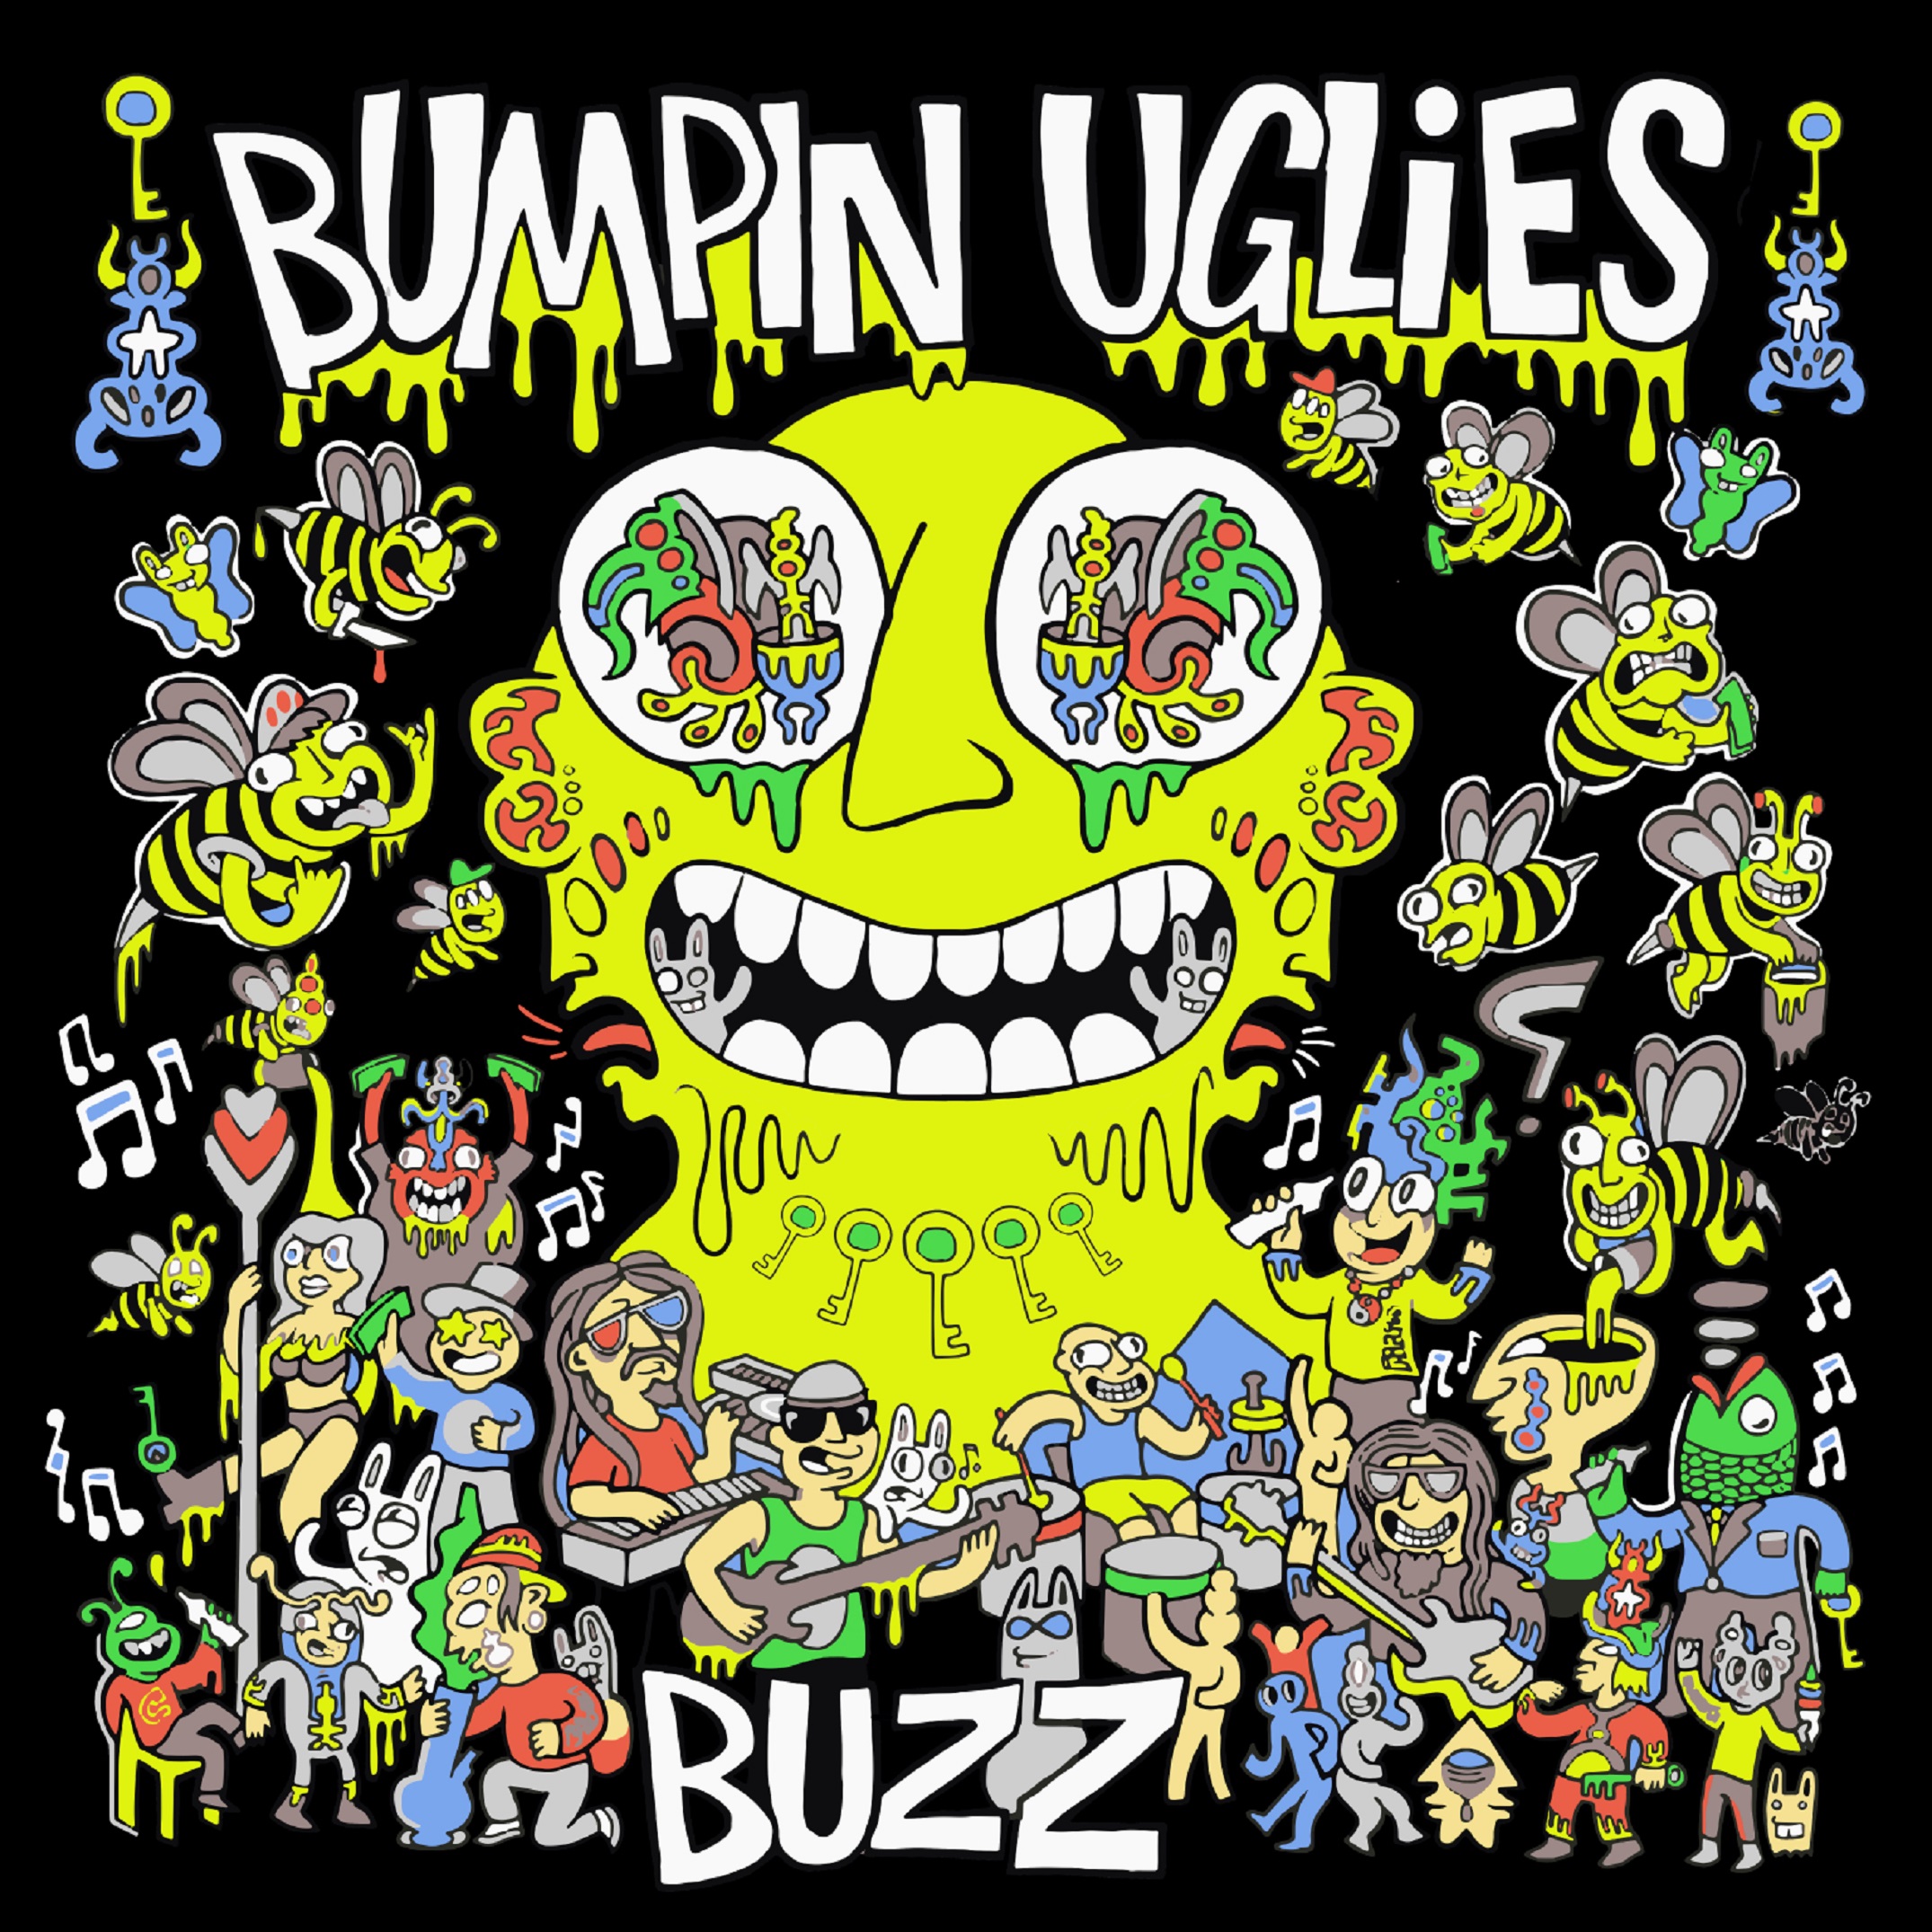 BUMPIN UGLIES ANNOUNCE EP BUZZ IN PARTNERSHIP WITH INEFFABLE MUSIC GROUP